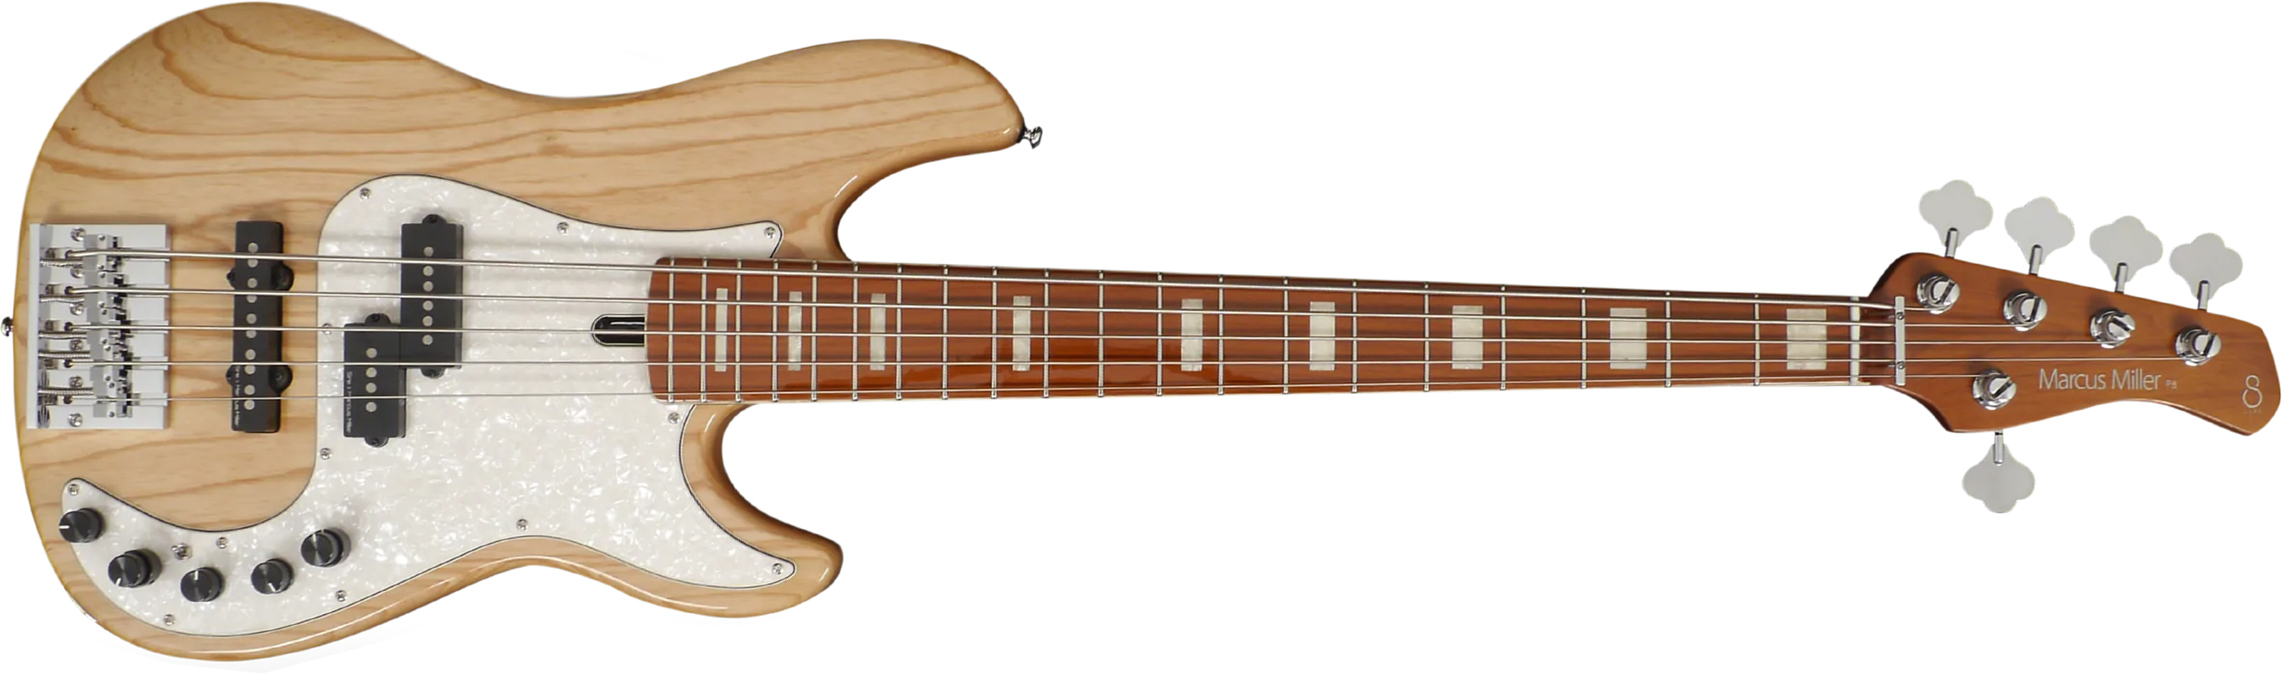 Marcus Miller P8 5st 5c Active Mn - Natural - Solid body electric bass - Main picture